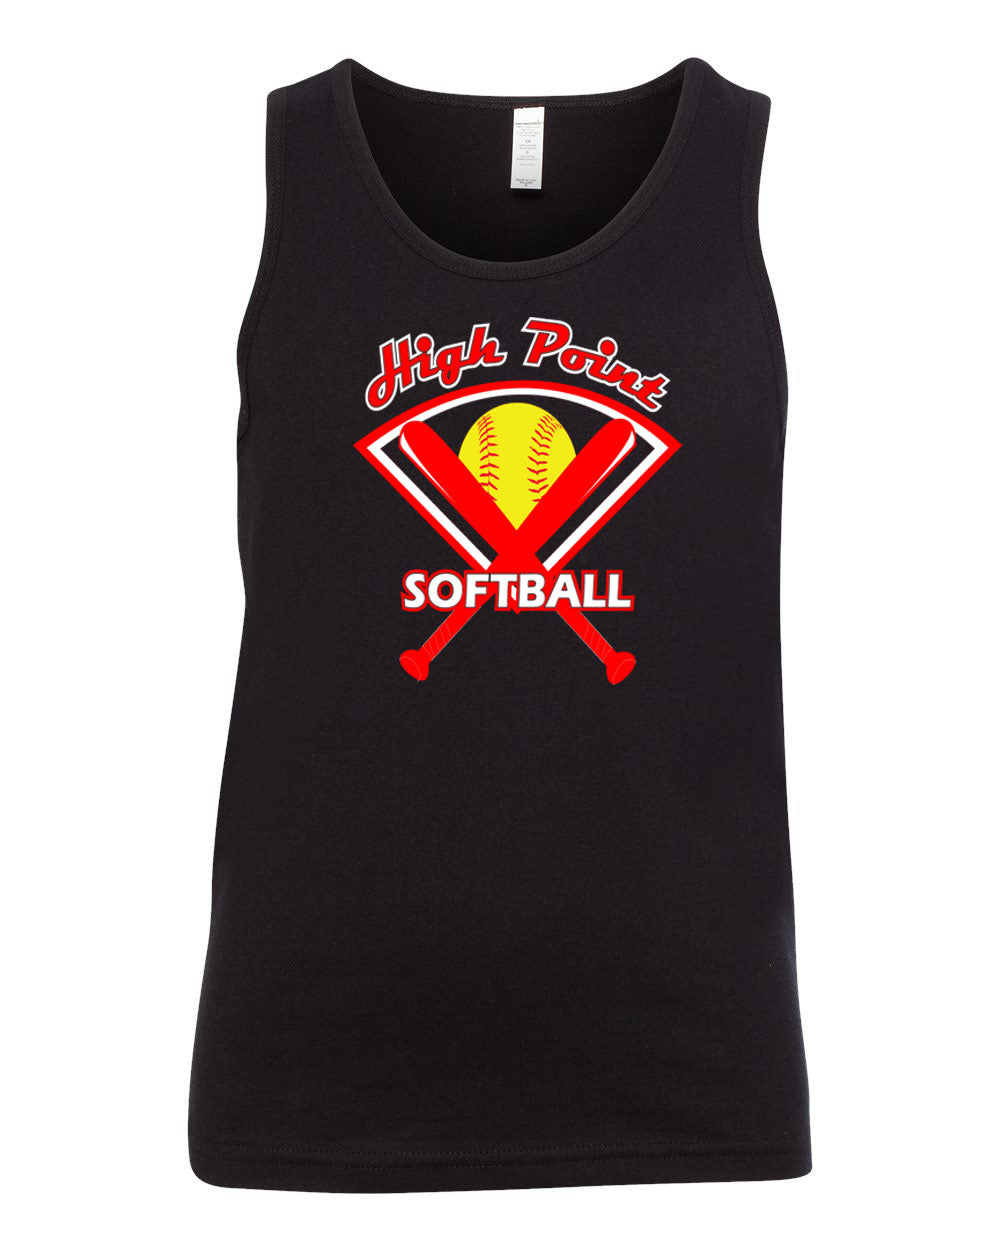 High Point Softball design 4 Ladies Muscle Tank Top